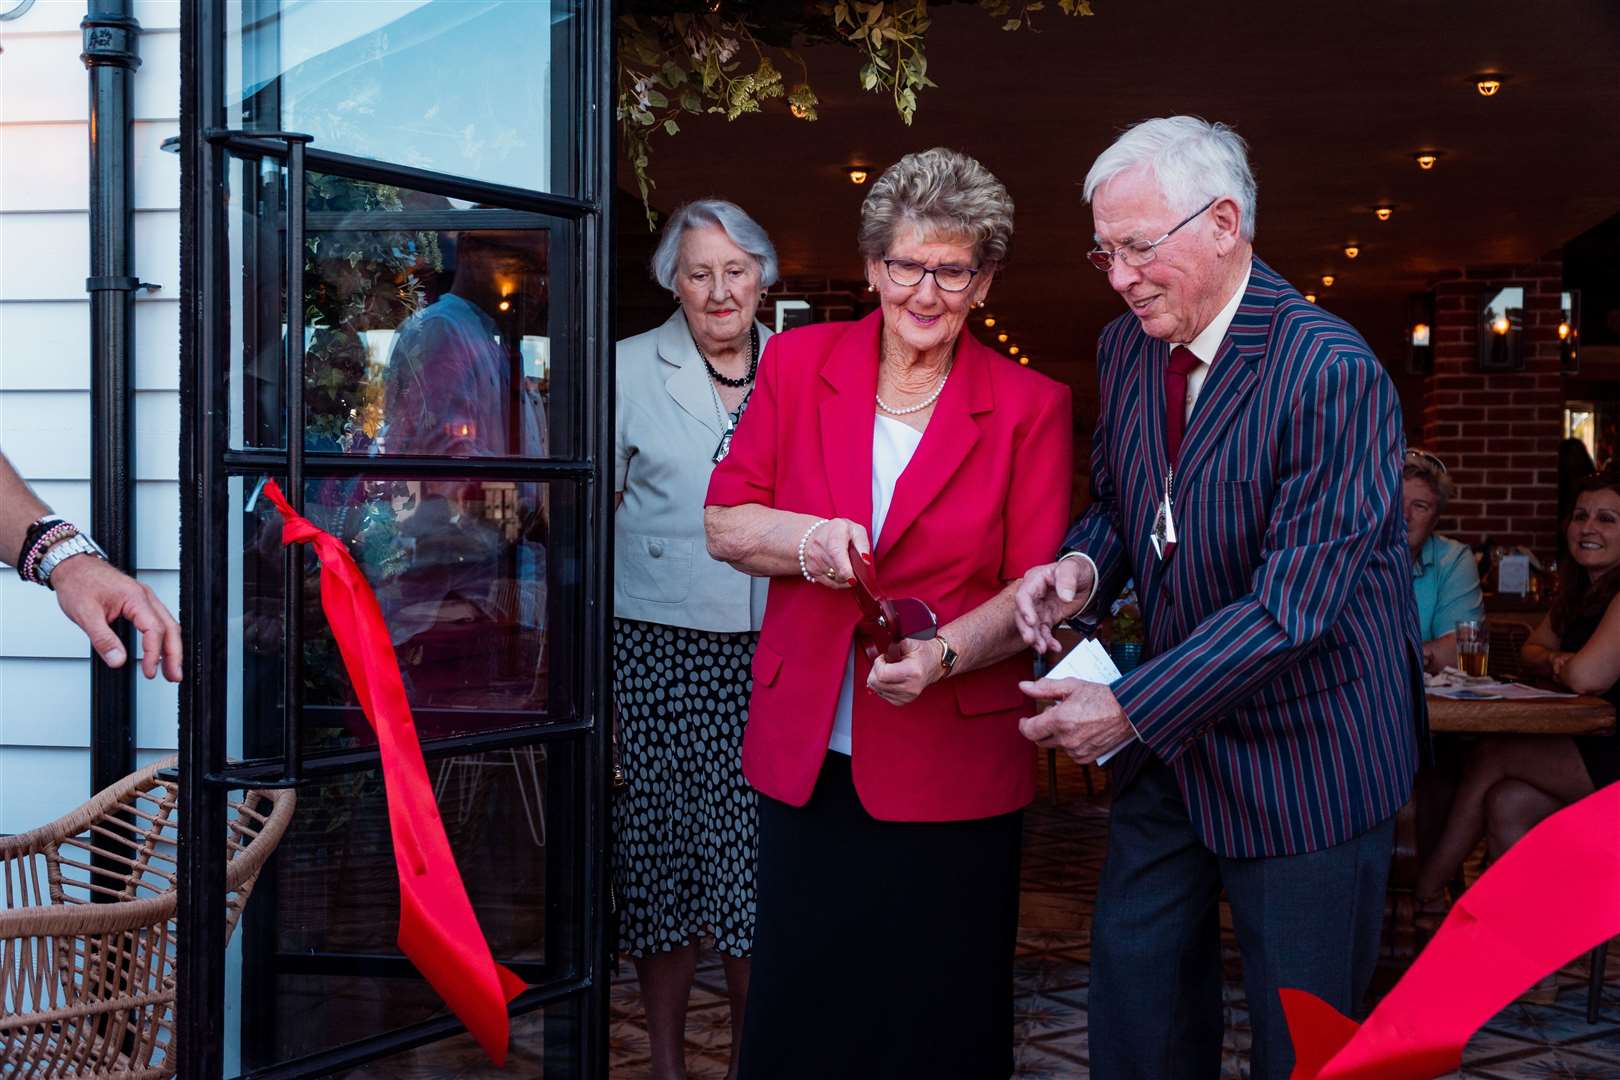 Monique Chaussy, 82, cuts the ribbon with Cllr John Link